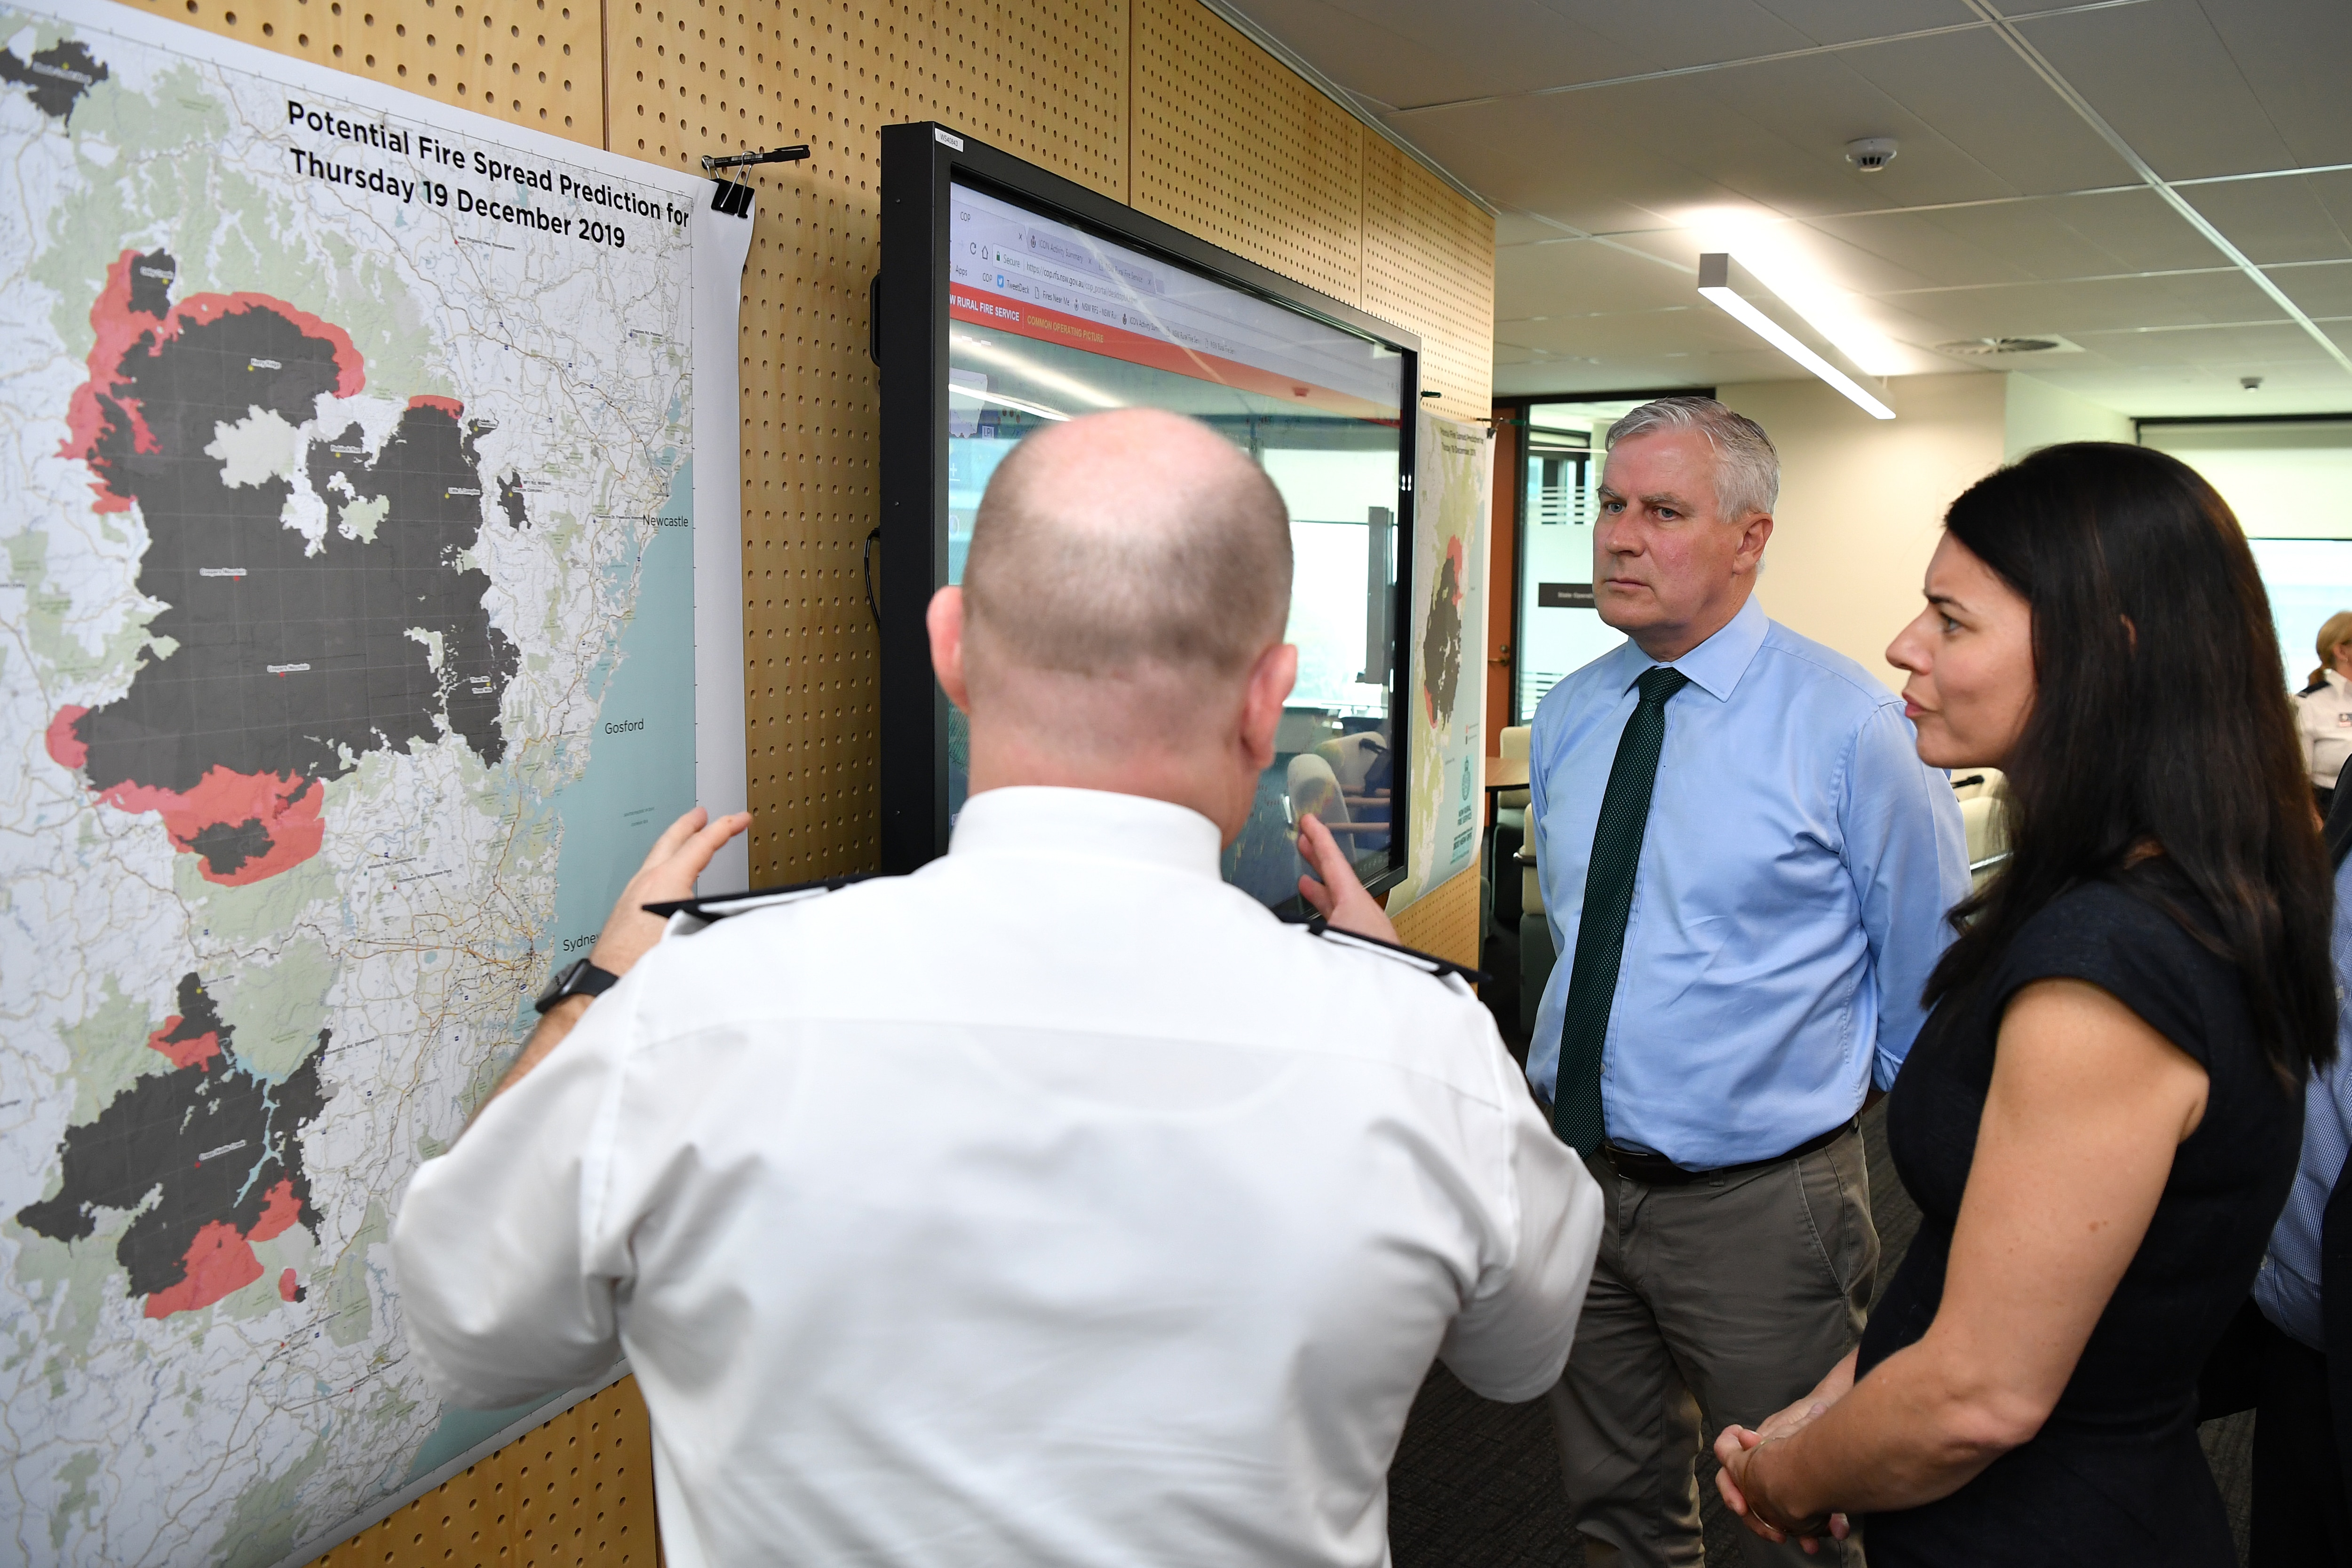 Acting Prime Minister Michael McCormack is briefed by NSW RFS Commissioner Shane Fitzsimmons.